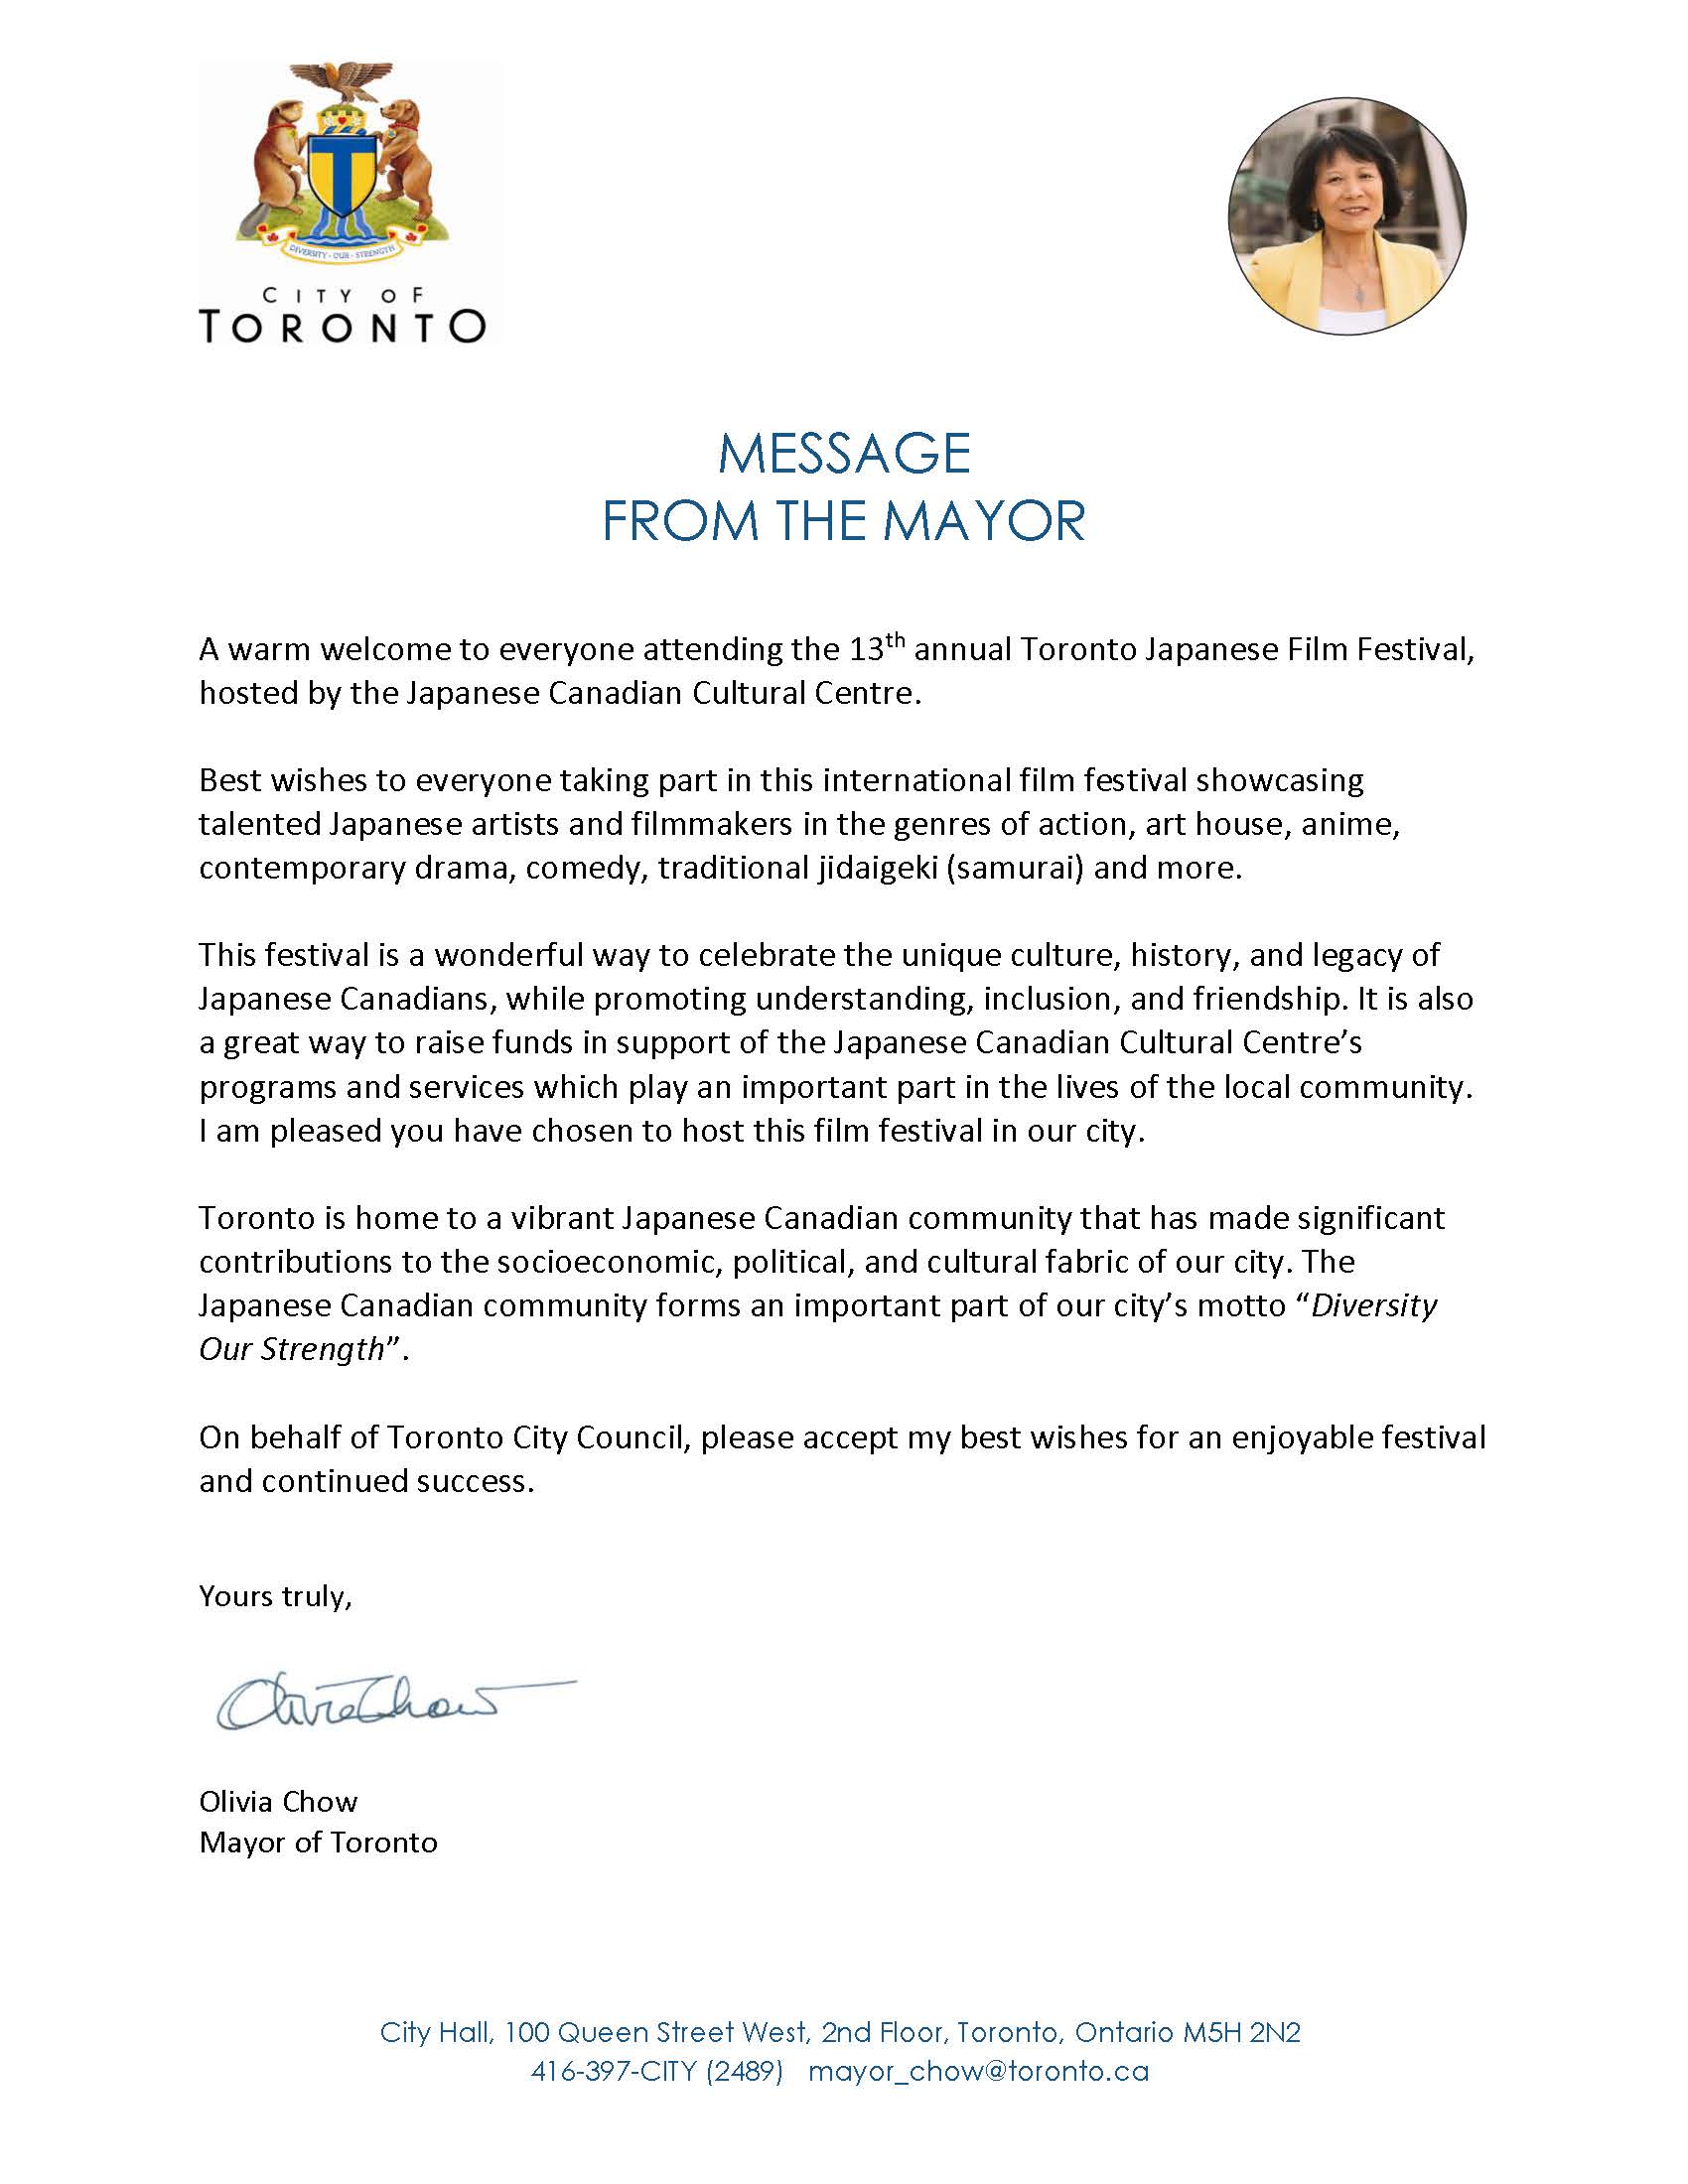 Message from the Mayor Olivia Chow